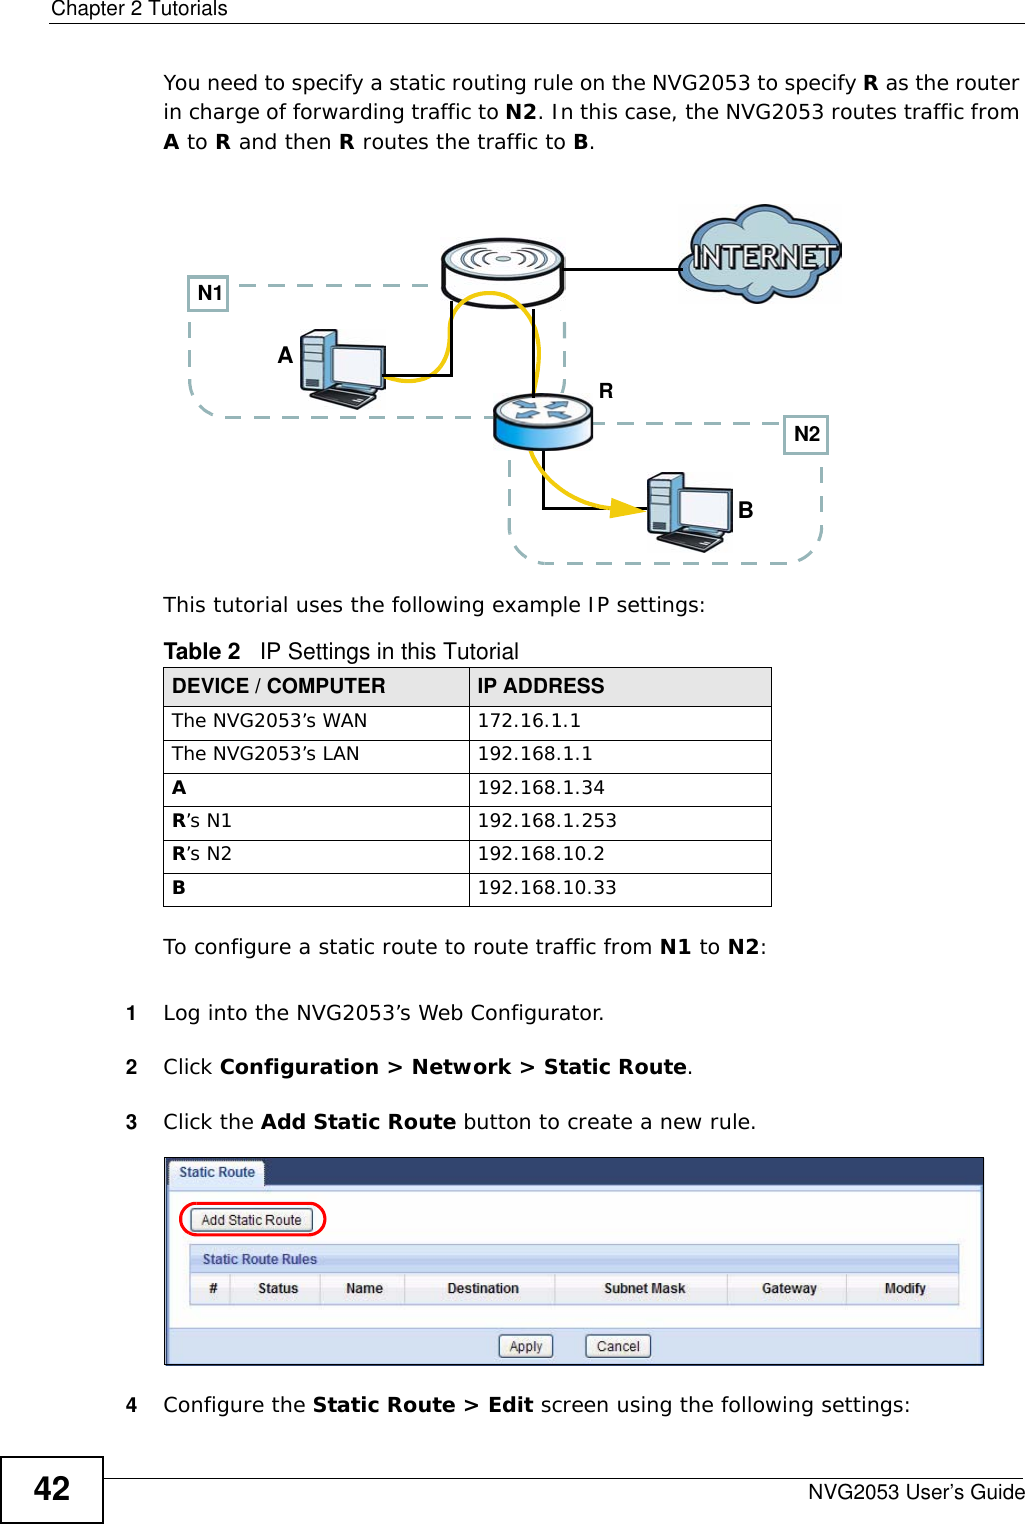 Chapter 2 TutorialsNVG2053 User’s Guide42You need to specify a static routing rule on the NVG2053 to specify R as the router in charge of forwarding traffic to N2. In this case, the NVG2053 routes traffic from A to R and then R routes the traffic to B.This tutorial uses the following example IP settings:To configure a static route to route traffic from N1 to N2:1Log into the NVG2053’s Web Configurator.2Click Configuration &gt; Network &gt; Static Route.3Click the Add Static Route button to create a new rule. 4Configure the Static Route &gt; Edit screen using the following settings:Table 2   IP Settings in this TutorialDEVICE / COMPUTER IP ADDRESSThe NVG2053’s WAN 172.16.1.1The NVG2053’s LAN 192.168.1.1A192.168.1.34R’s N1  192.168.1.253R’s N2  192.168.10.2B192.168.10.33N2BN1AR